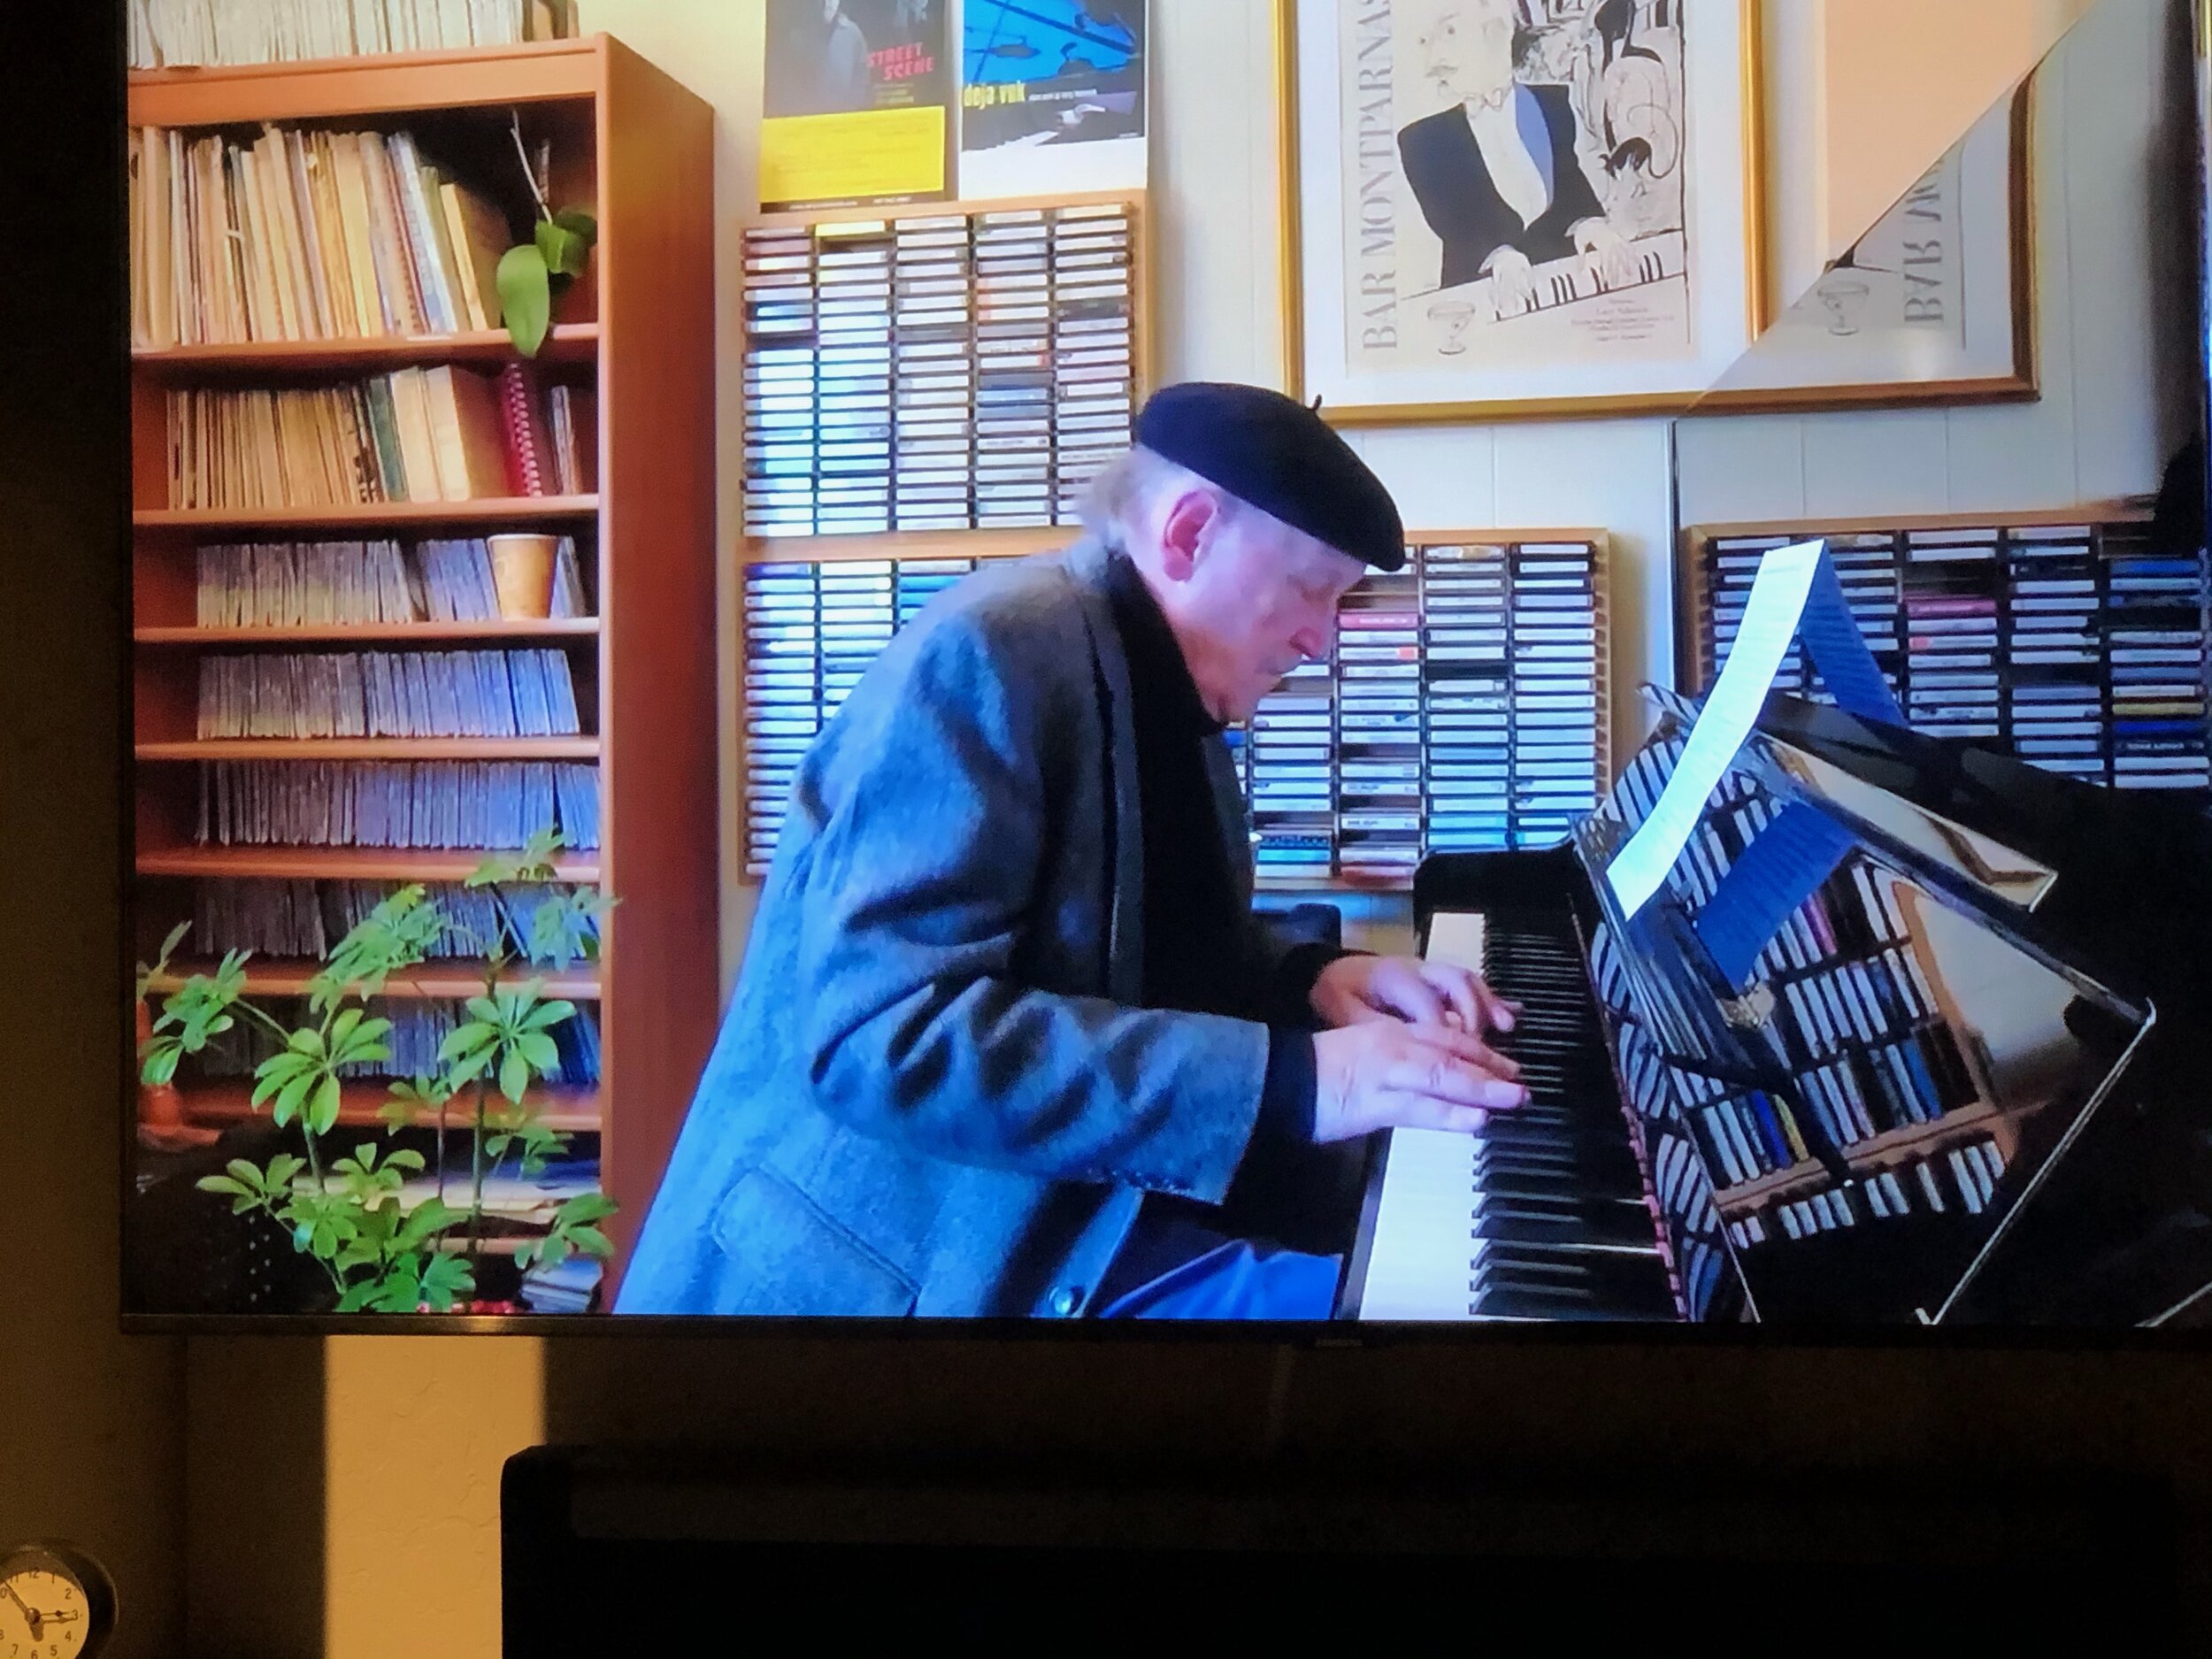  The only student of Bay Area piano legend Vince Guaraldi, 85 year old Larry Vuckovitch has stories of playing with so many greats of jazz.  He has weekly programs on YouTube.  We also check out Piedmont Piano Company's Sunday night concerts.  That's